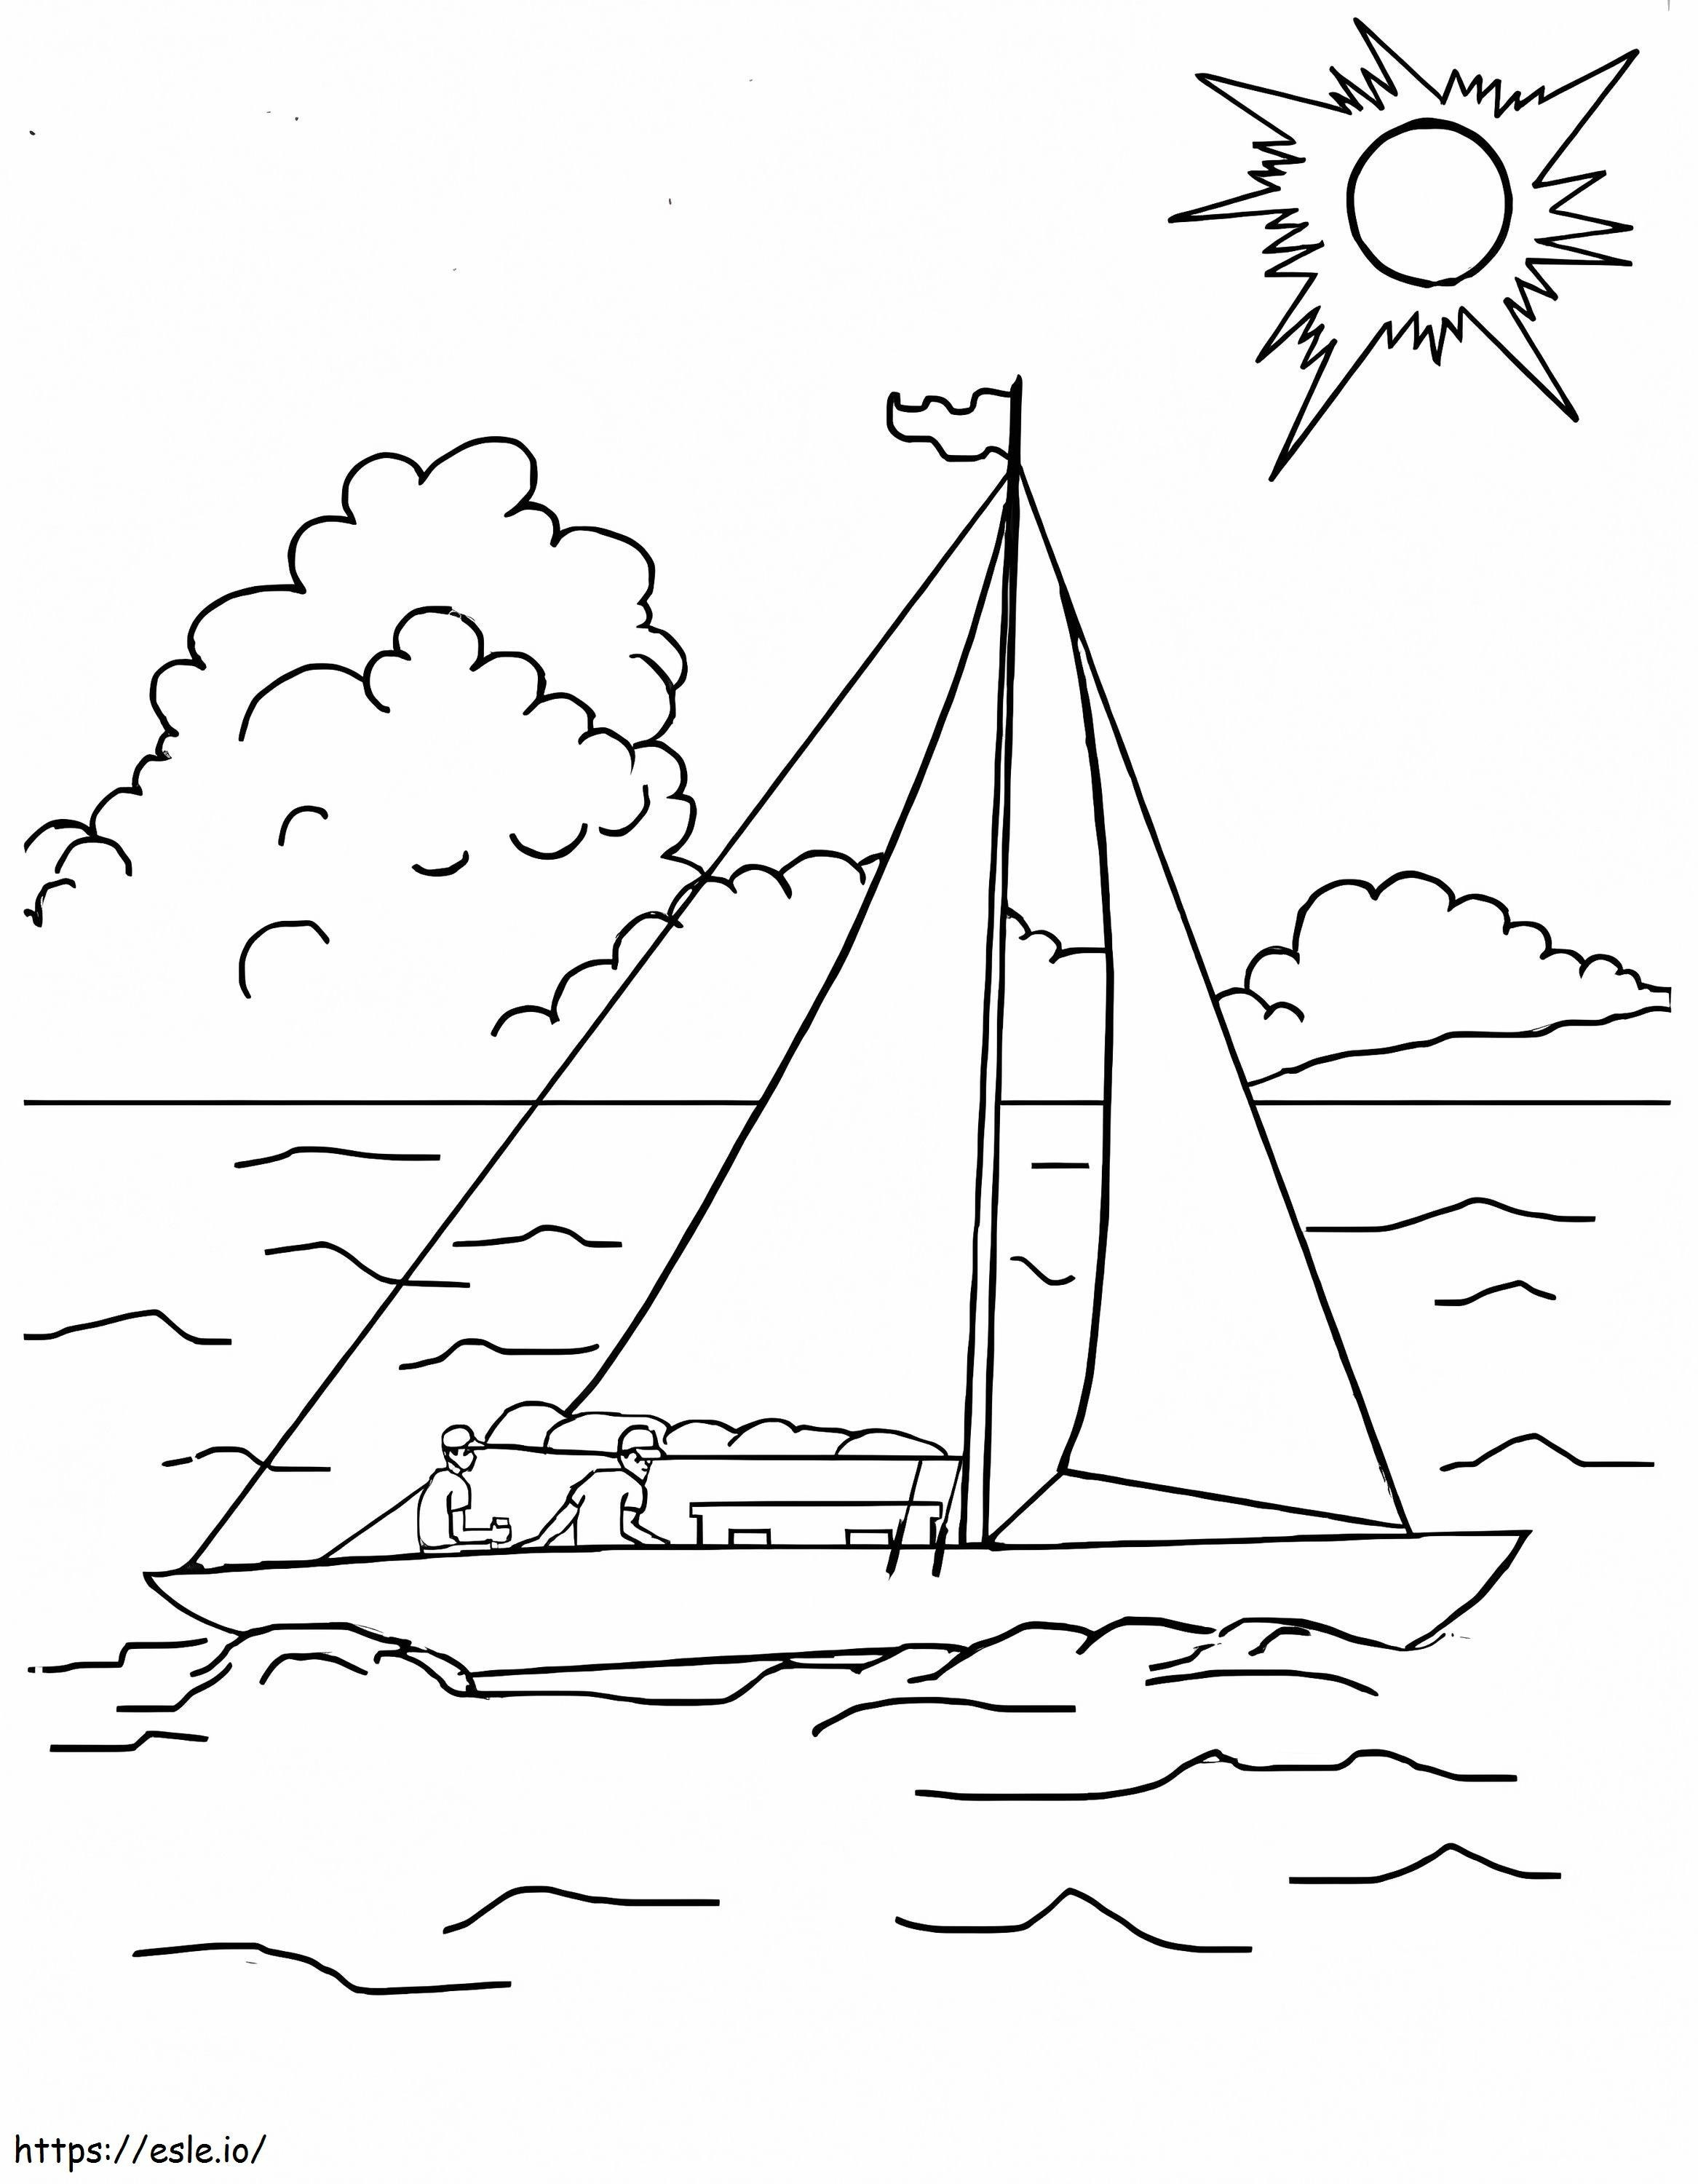 On The Sailboat coloring page